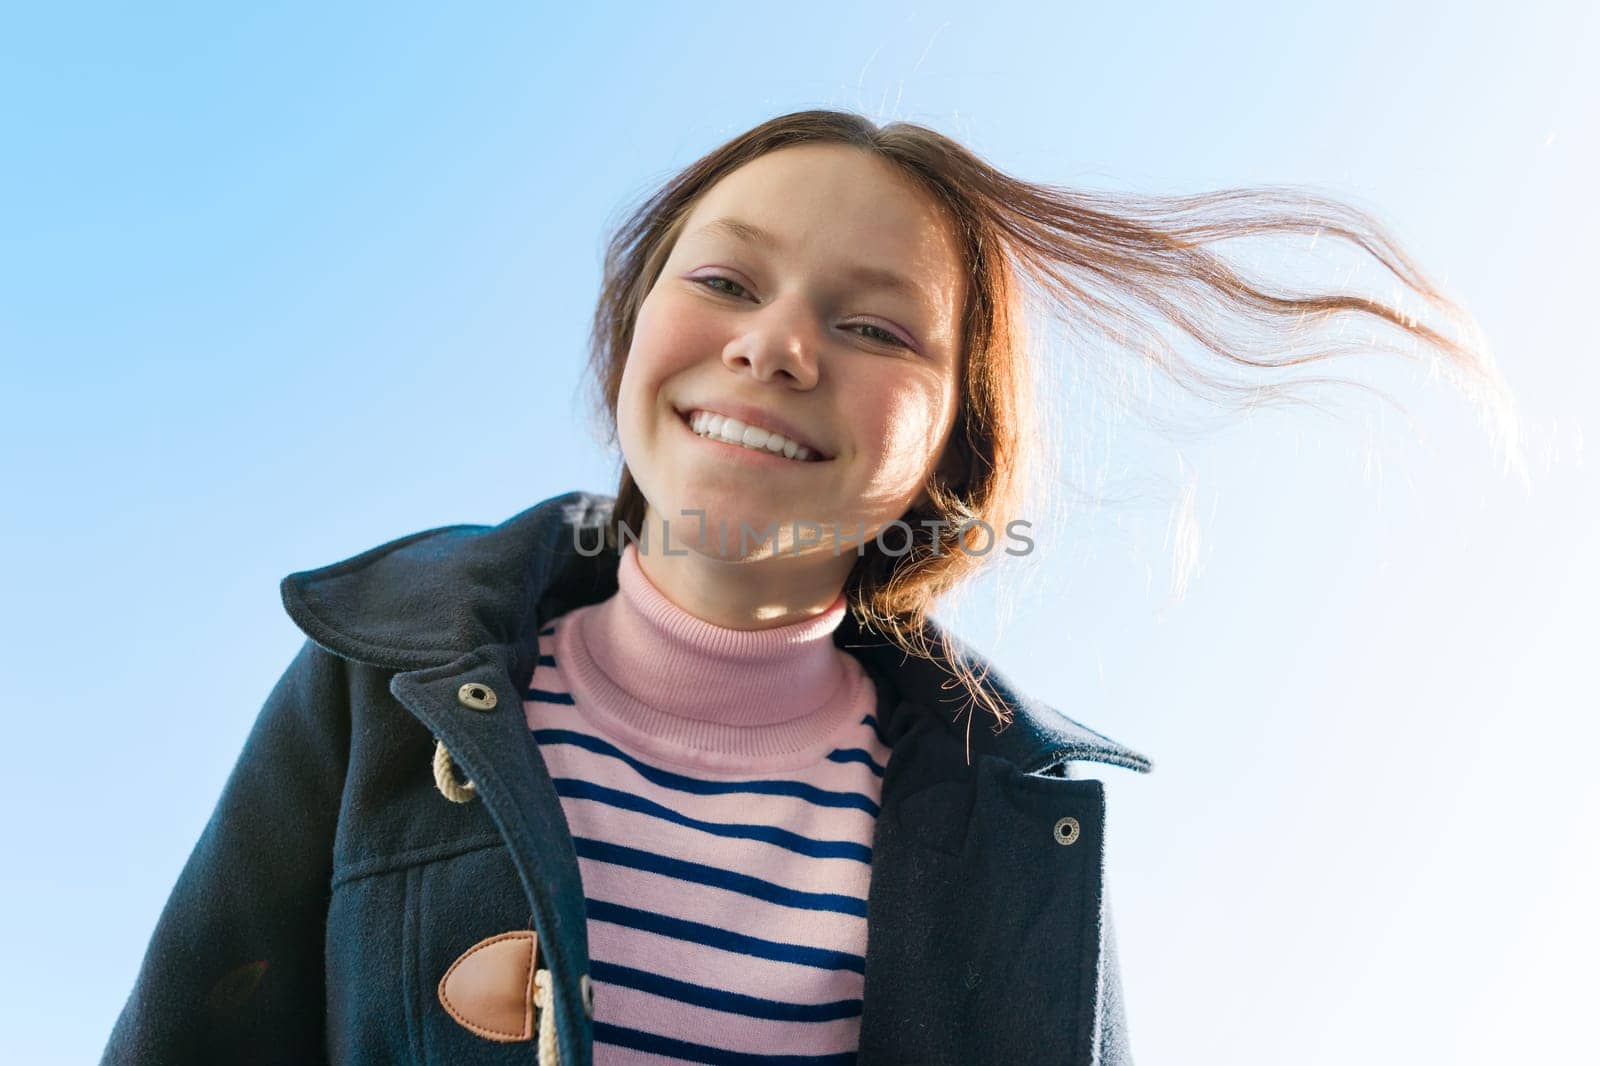 Portrait of a young smiling teen girl, background blue sky.